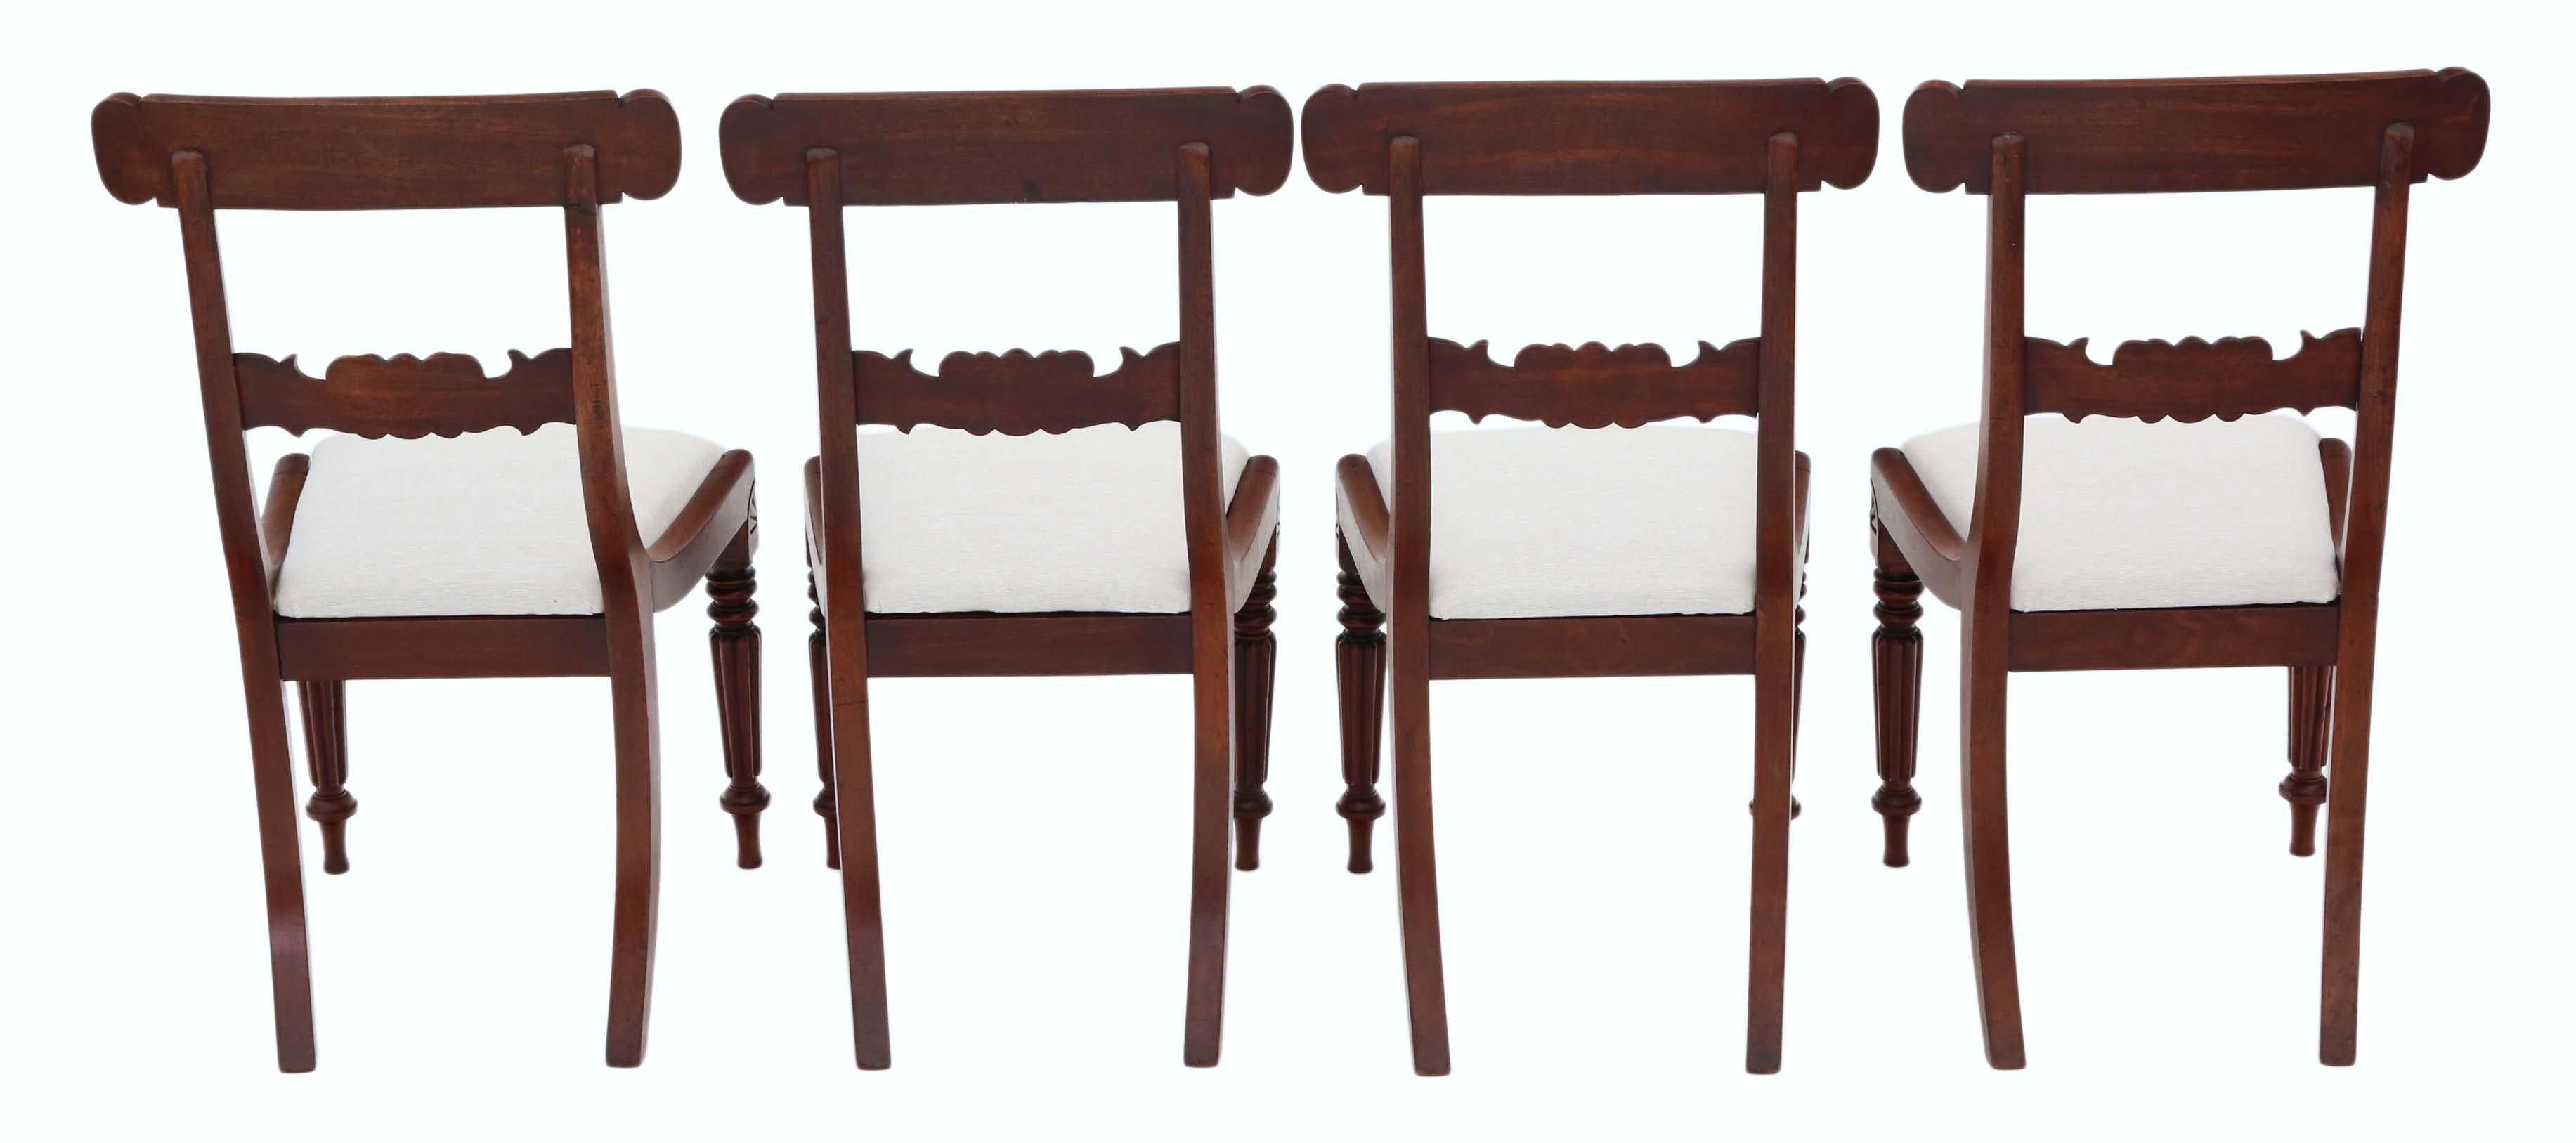 Antique quality set of 4 William IV carved mahogany dining chairs.
Date from circa 1835 with great Mellon fluted legs.
Solid, heavy and strong with no loose joints.
Recent upholstery in a heavy weight upholstery fabric, with a natural, light